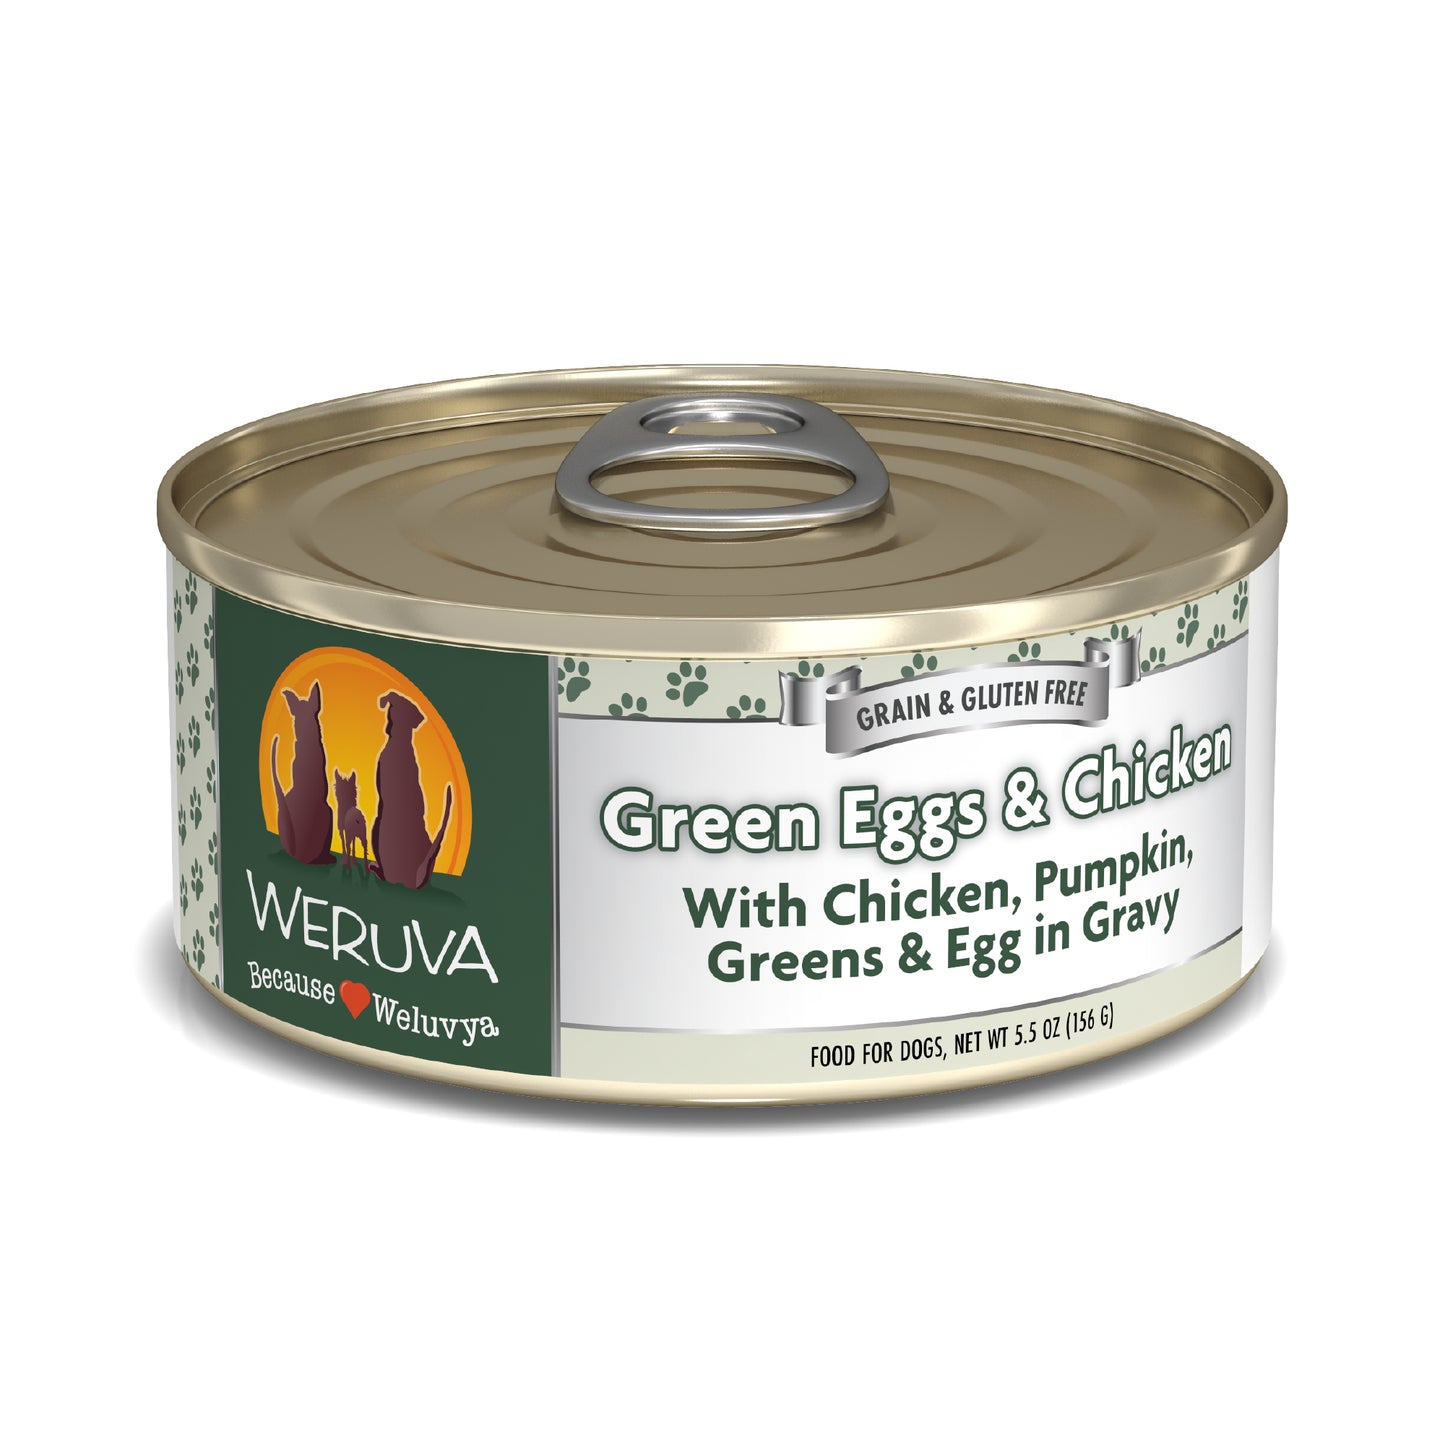 Weruva Classic Dog food 5.5oz Can Green Eggs and Chicken